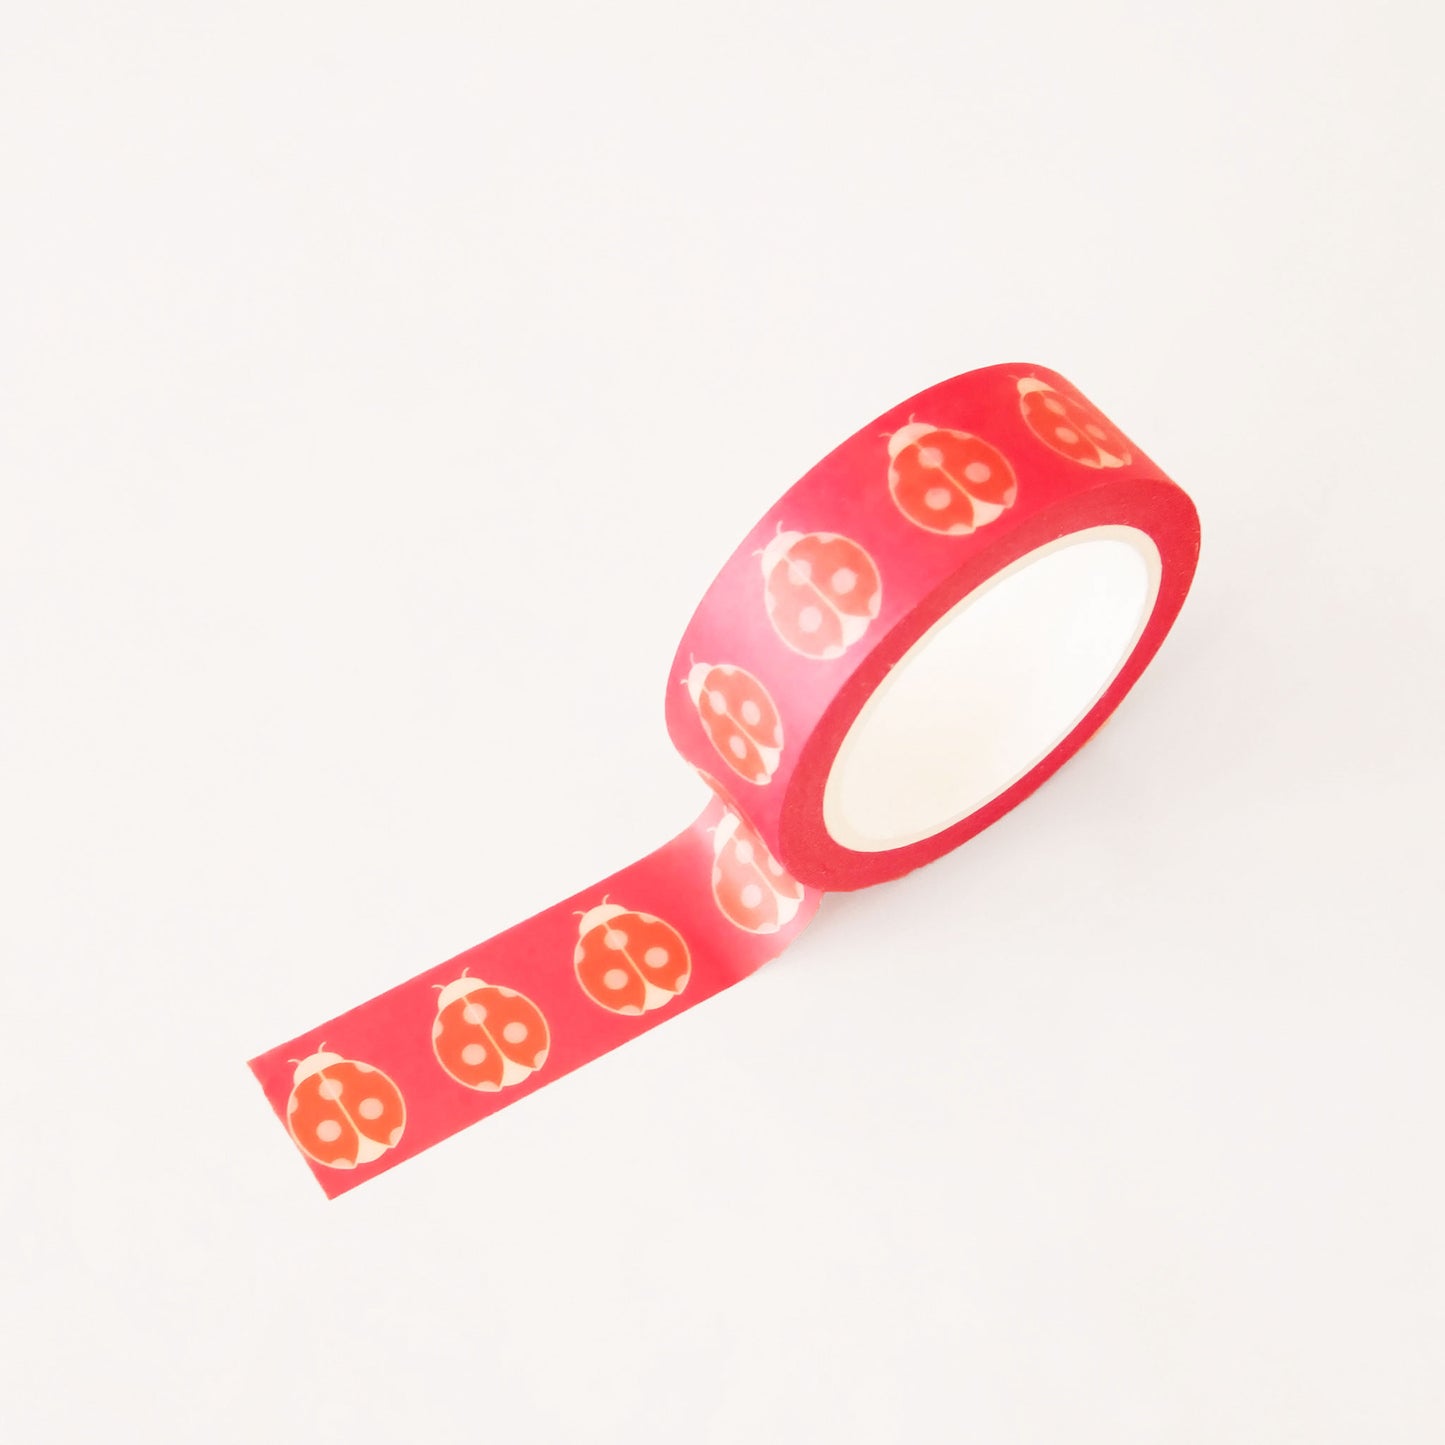 Roll of pink washi tape covered in red ladybugs. The roll is position upright, partially unrolled.